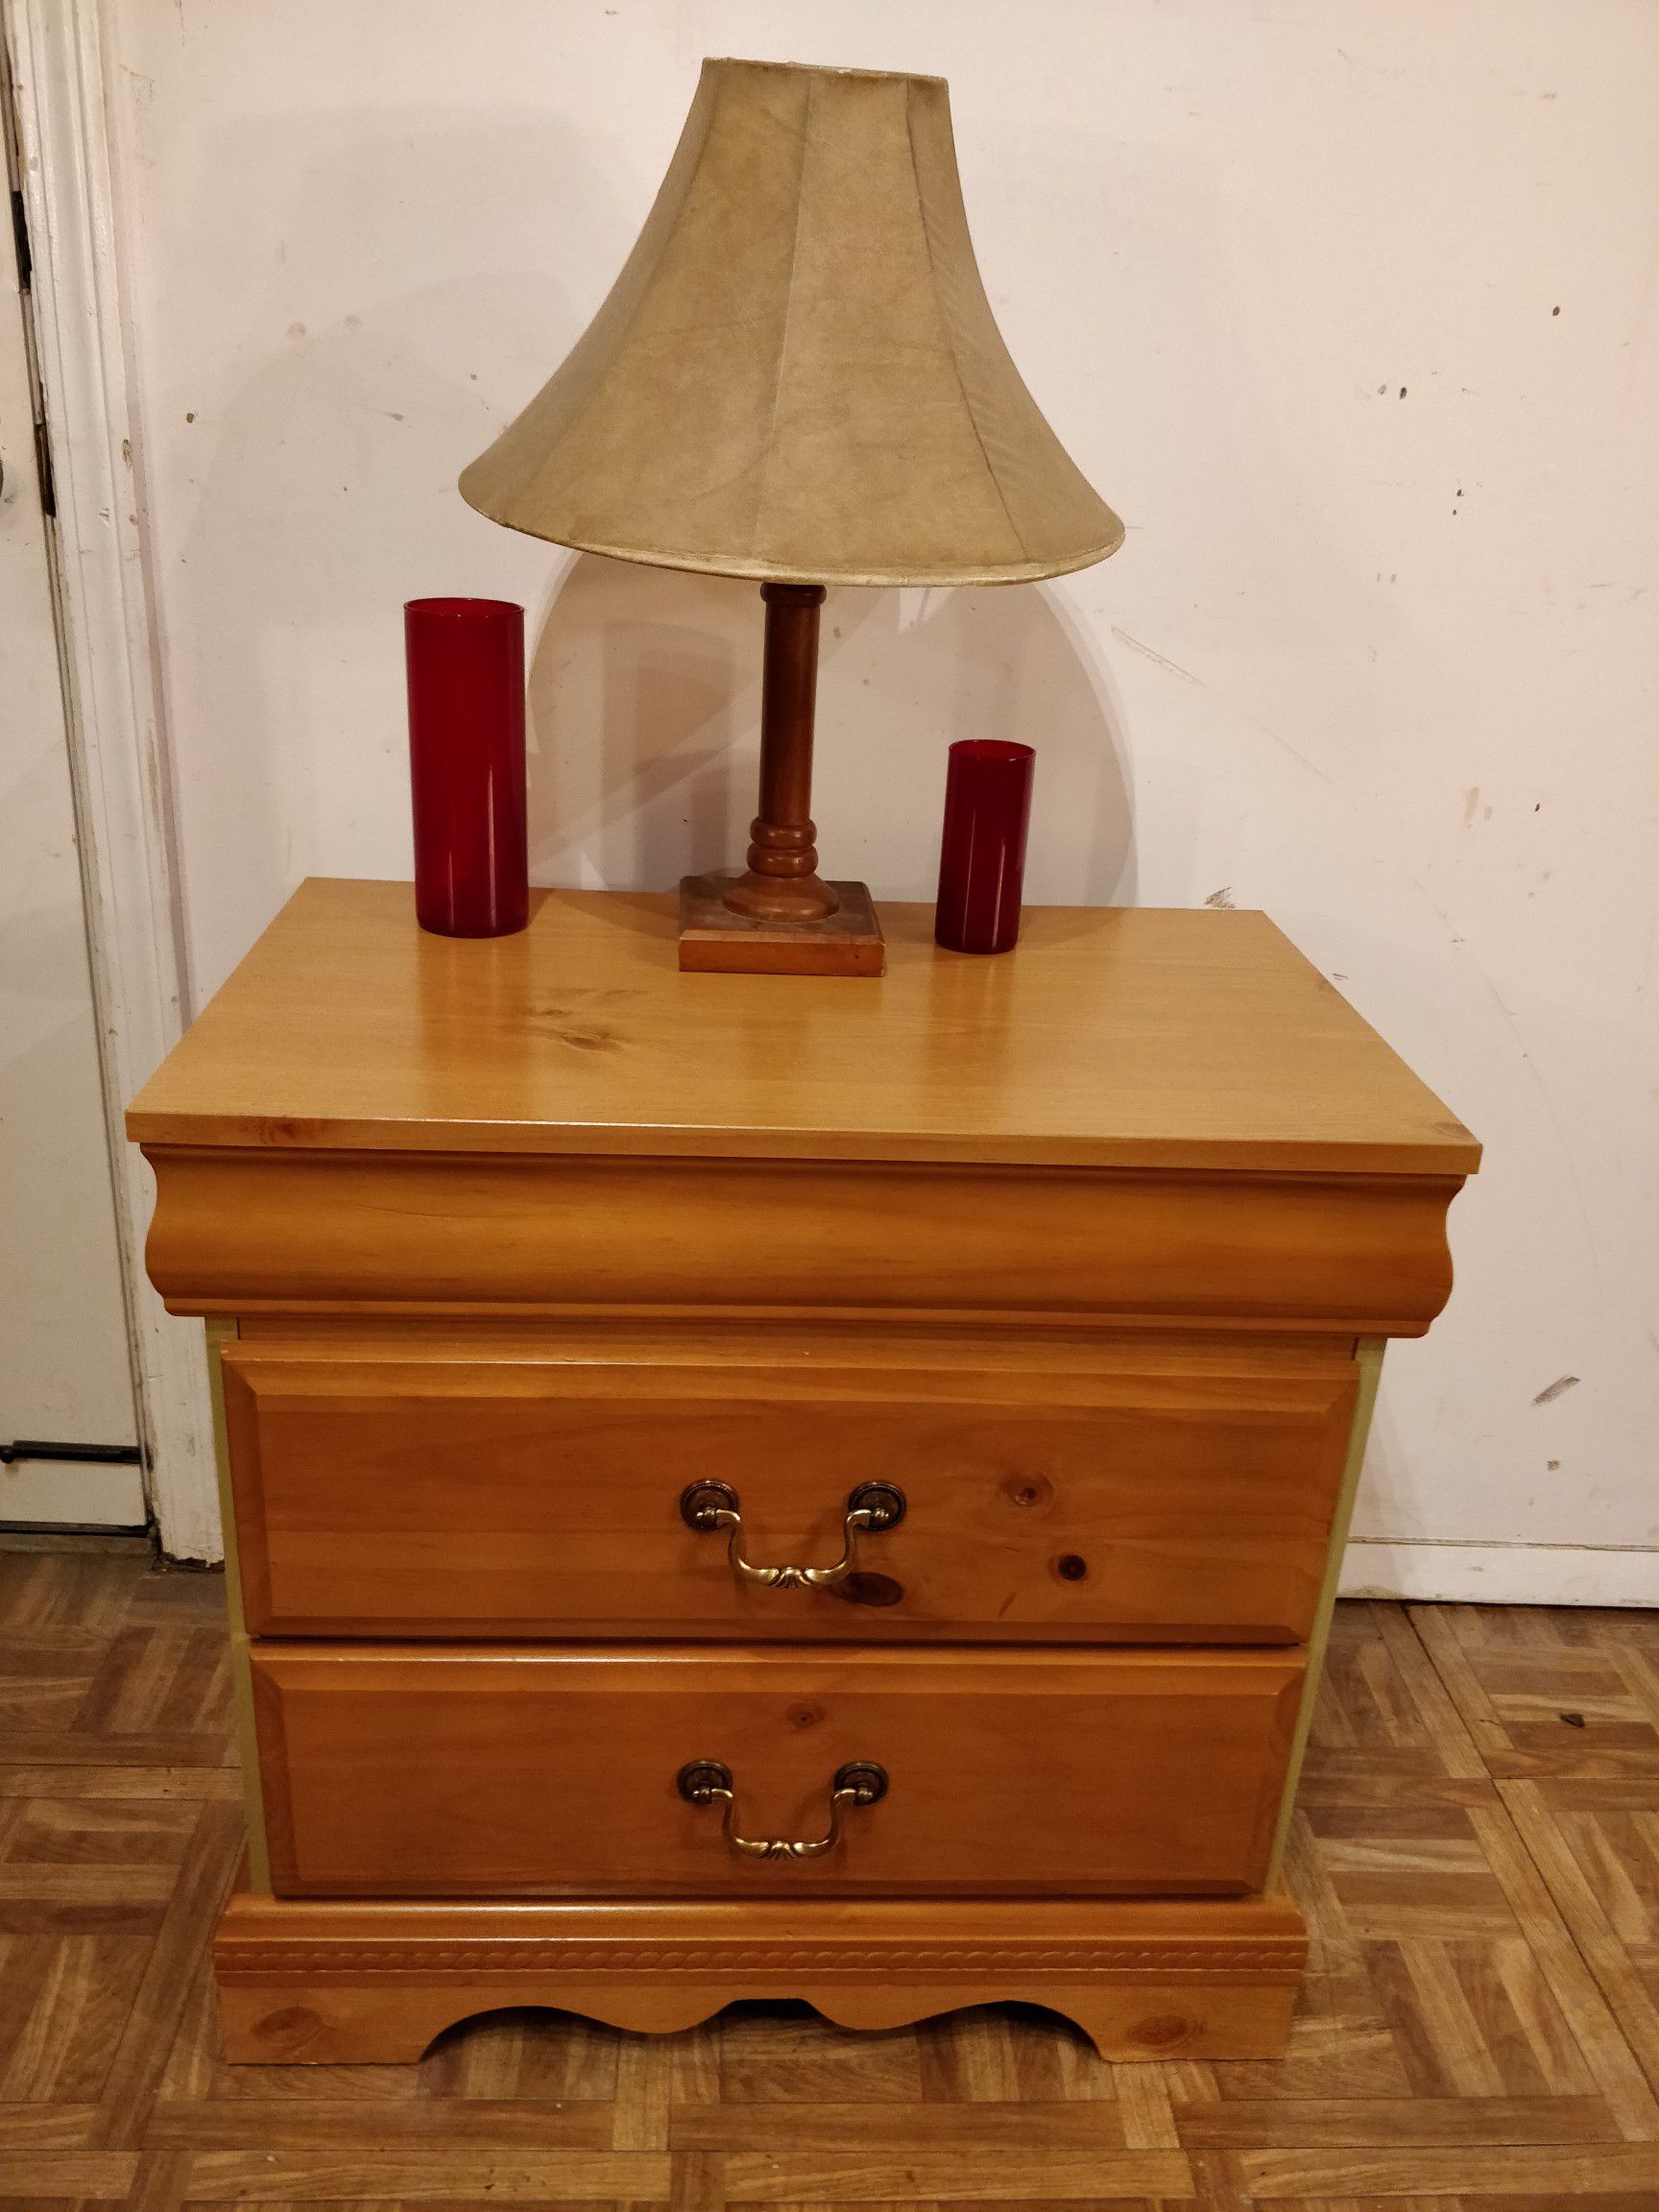 Like new modern night stand in great condition, all drawers sliding smoothly. L26"*W16"*H24.5"